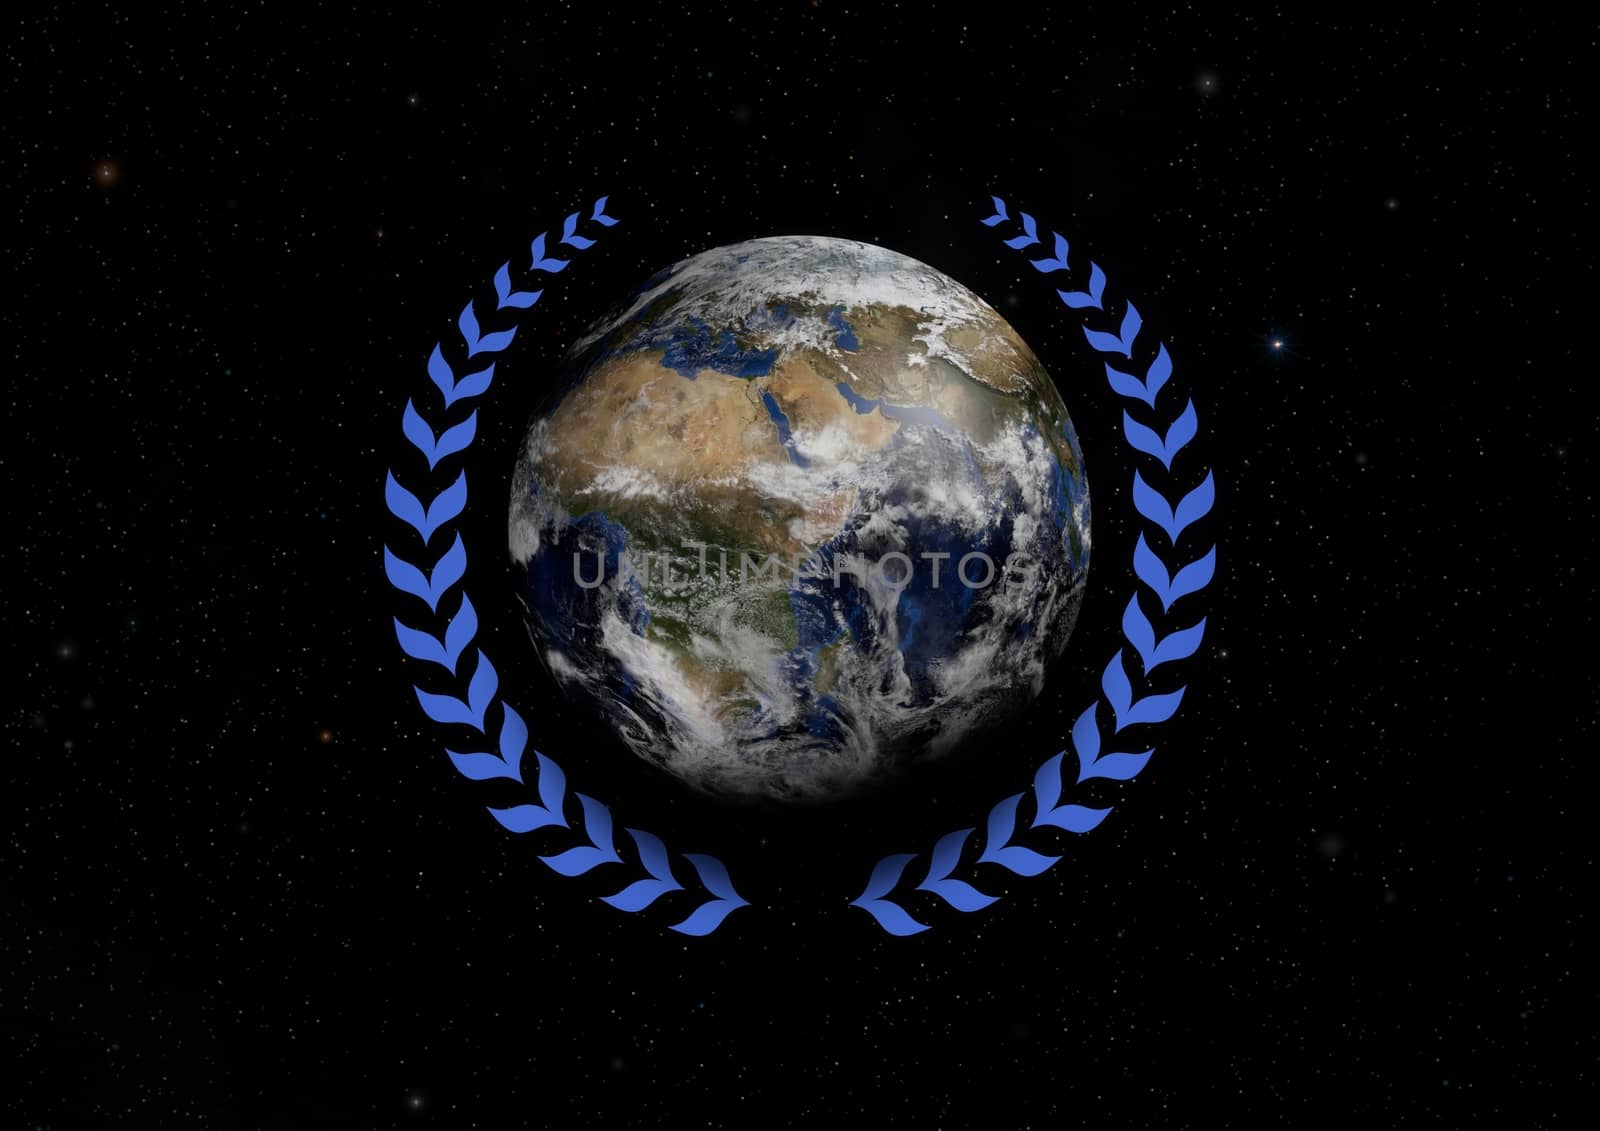 Illustrated Earth with a blue Laurel wreath